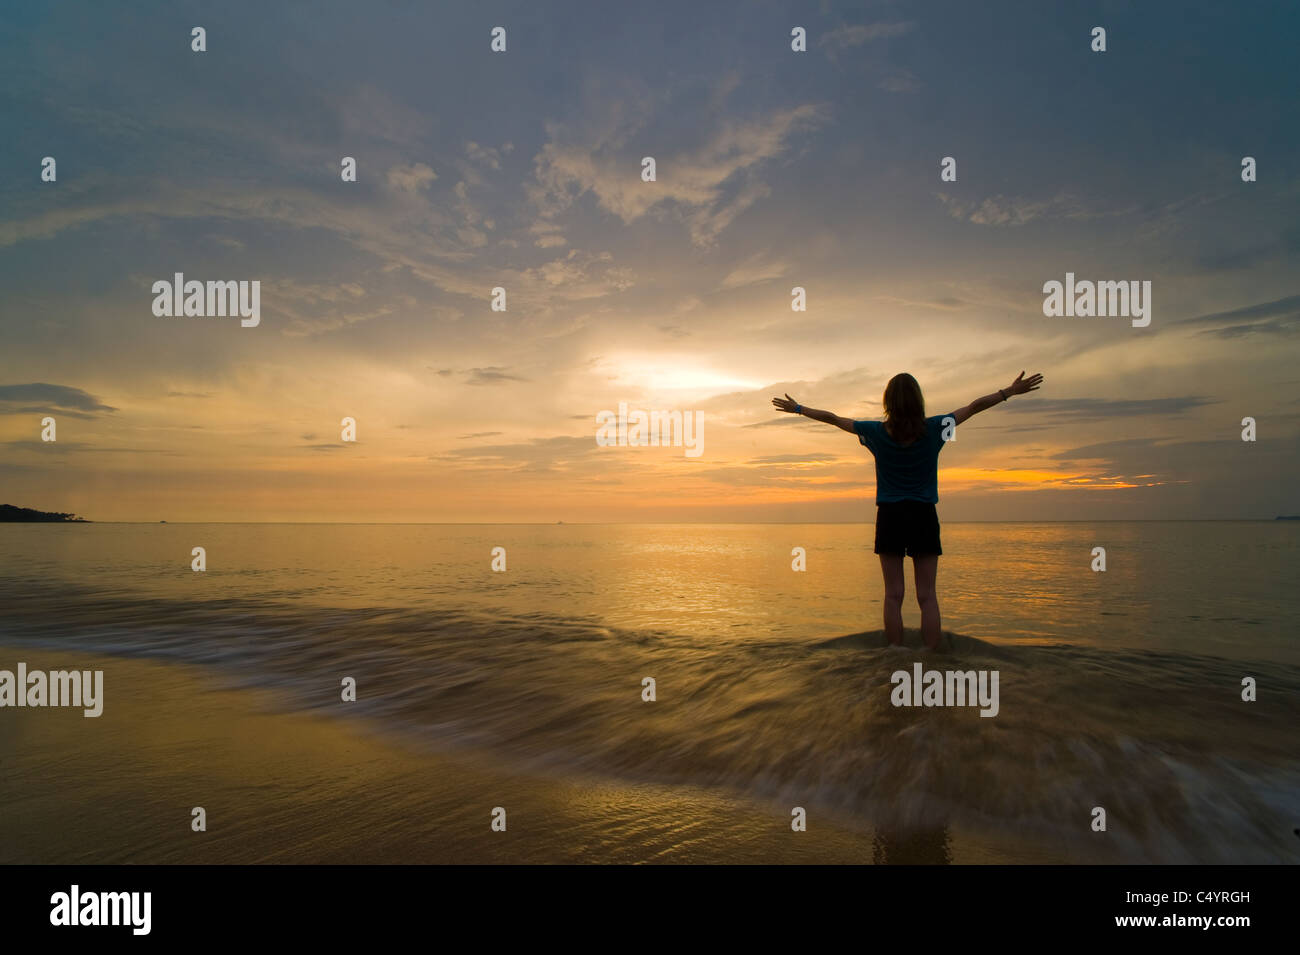 A young woman at the beach, standing in the sea at sunset with her hands in the air, celebrating freedom or worshipping God Stock Photo